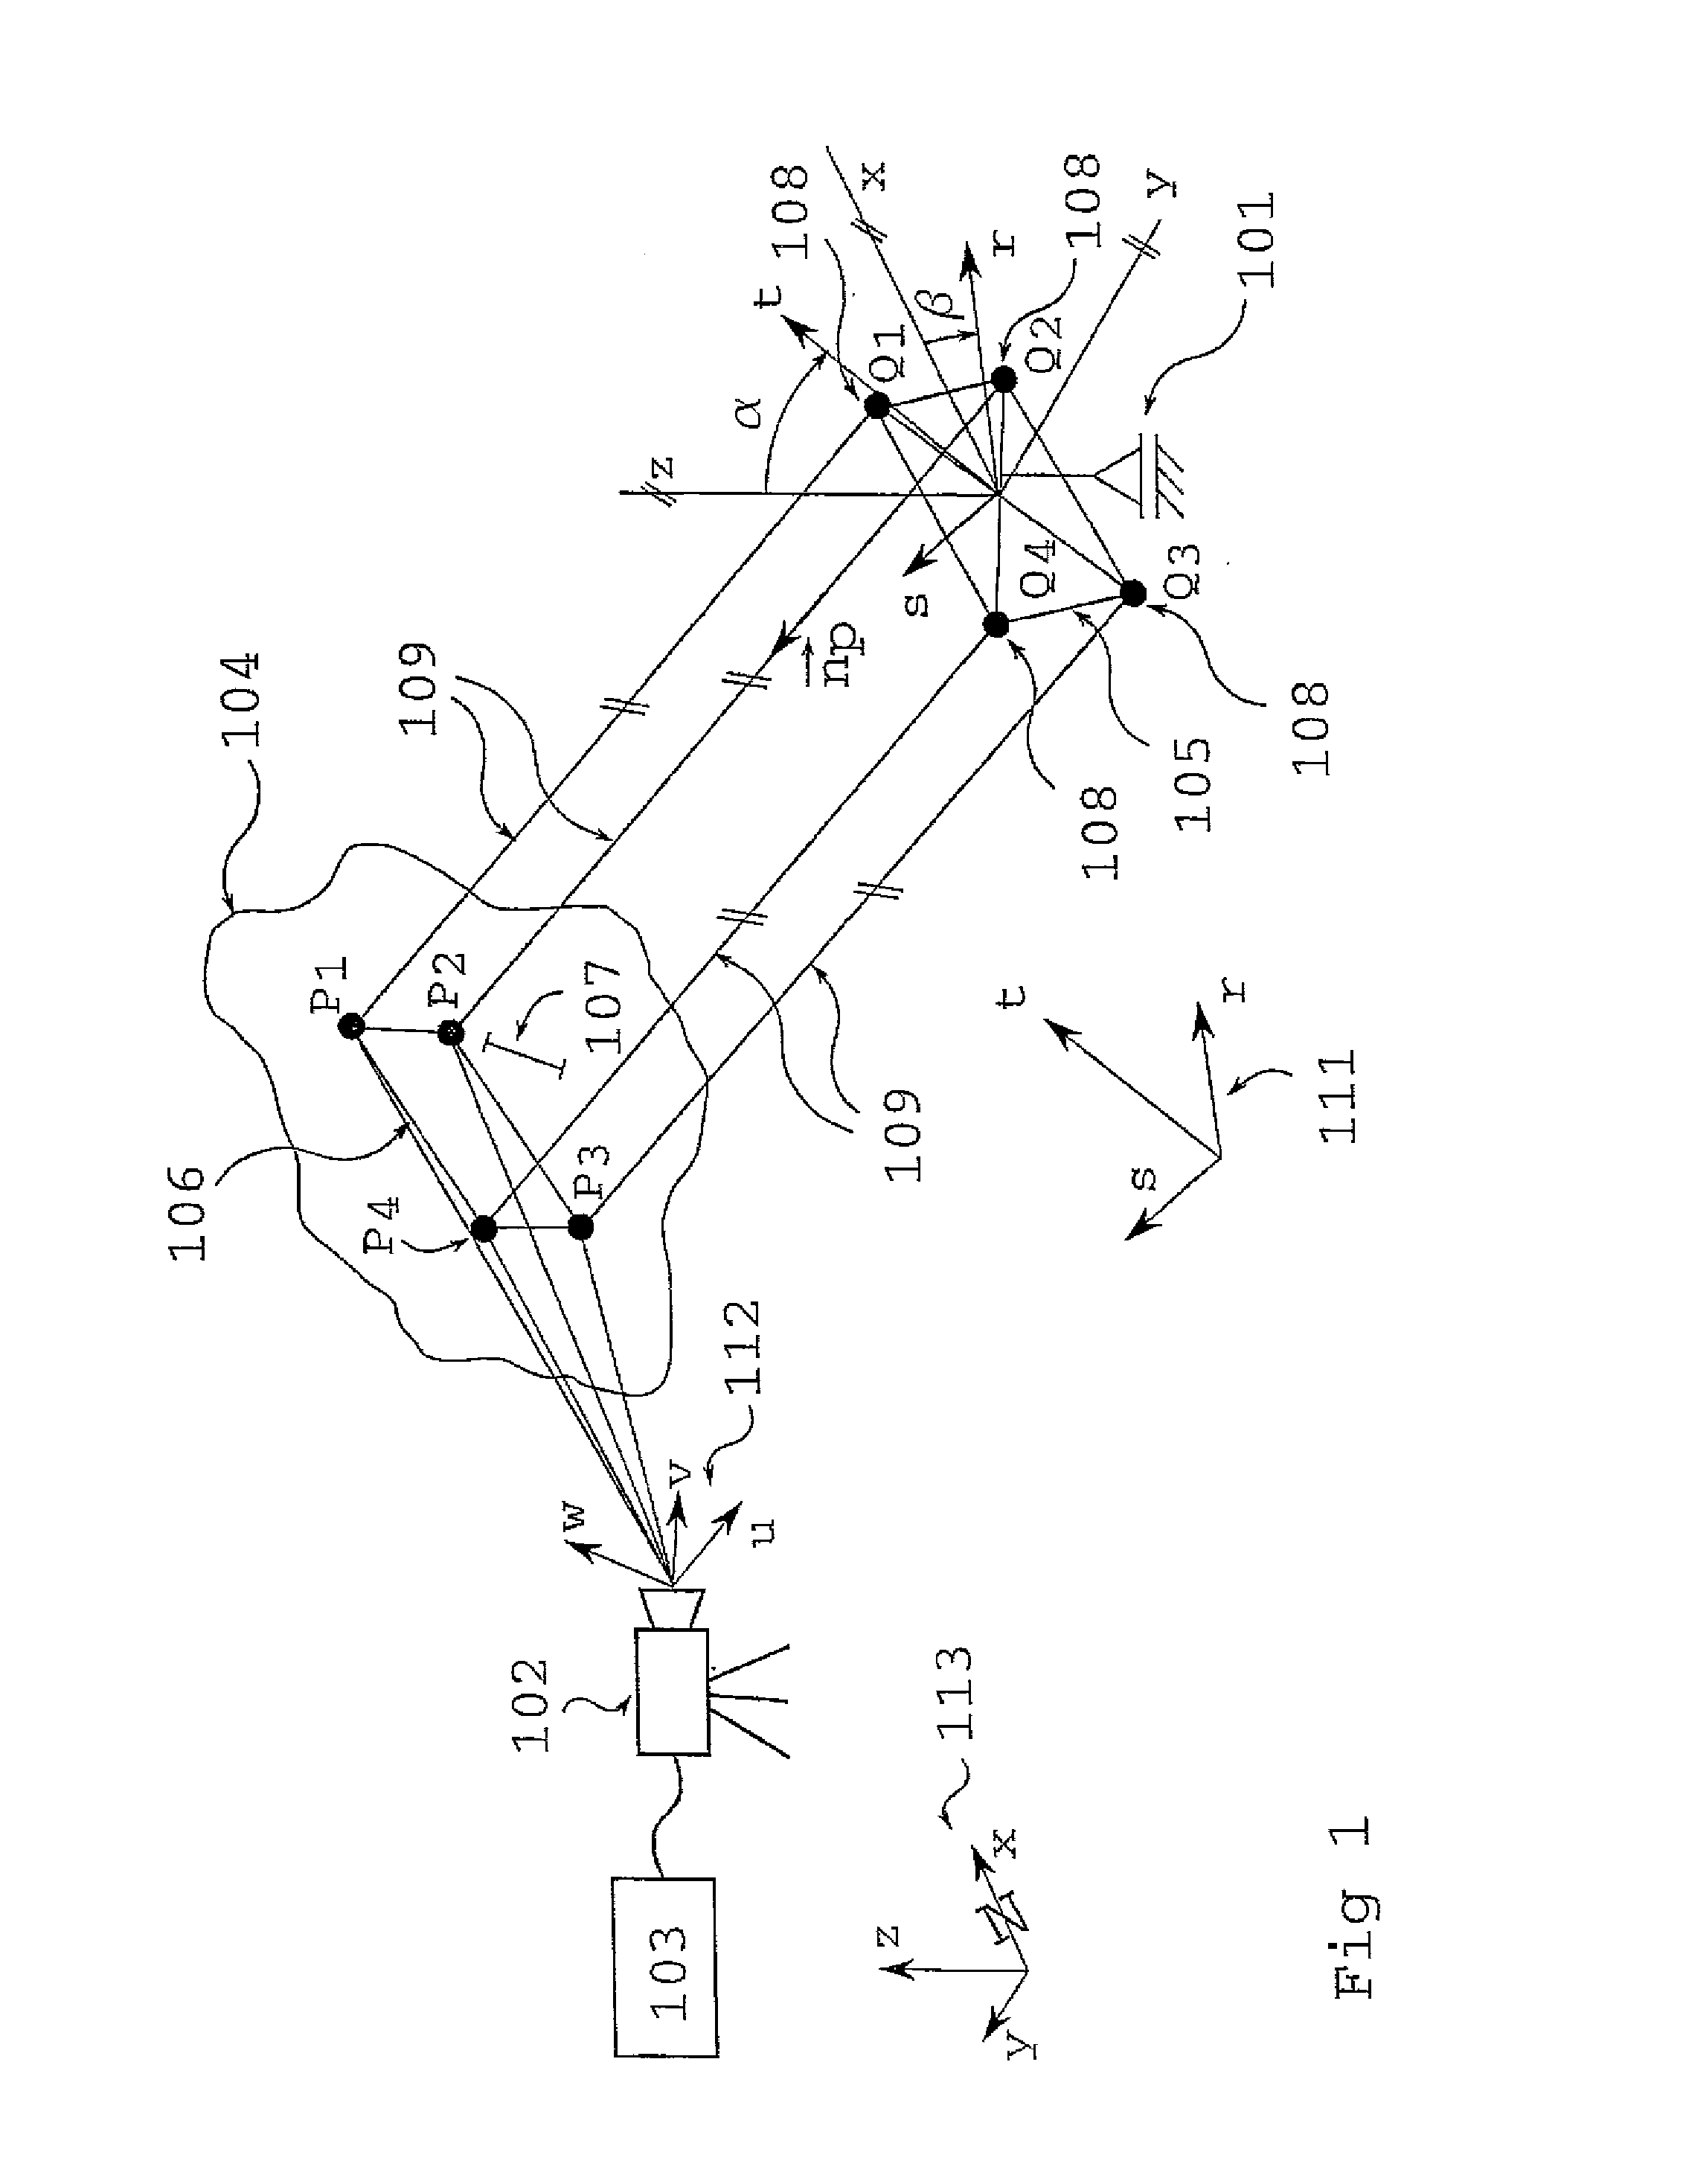 Mobile Projection System For Scaling And Orientation Of Surfaces Surveyed By An Optical Measuring System